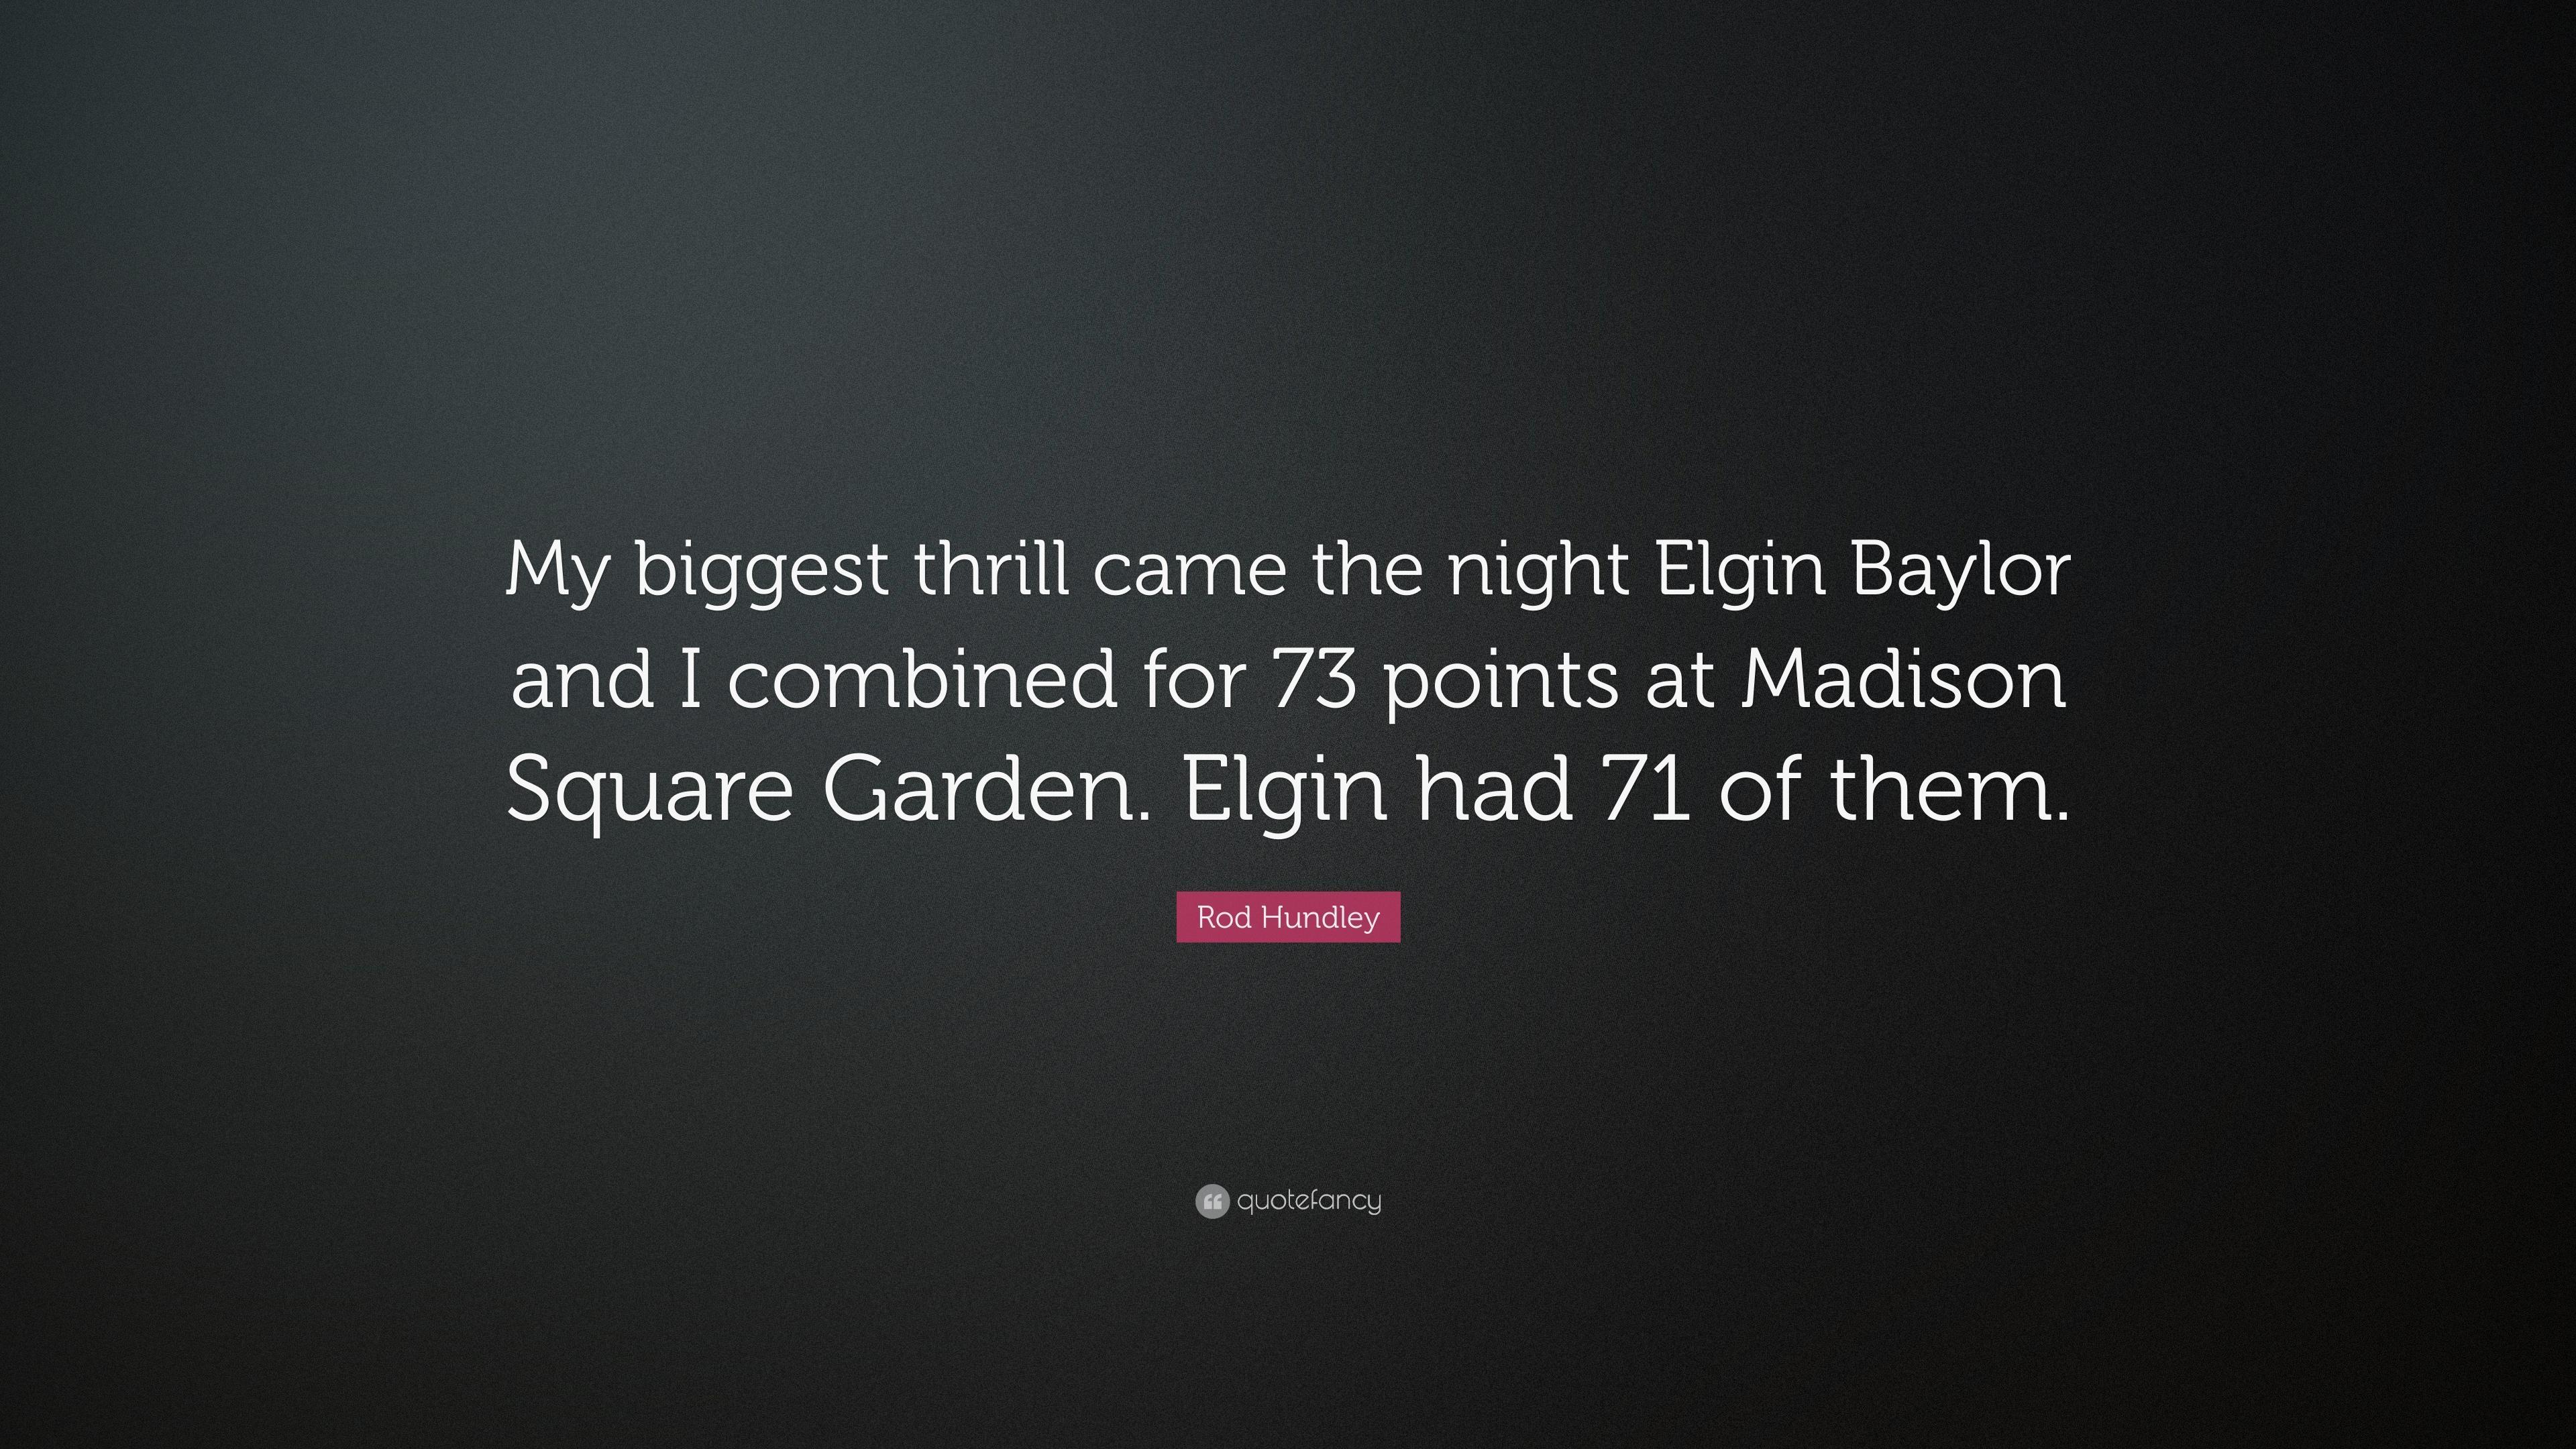 Rod Hundley Quote: “My biggest thrill came the night Elgin Baylor